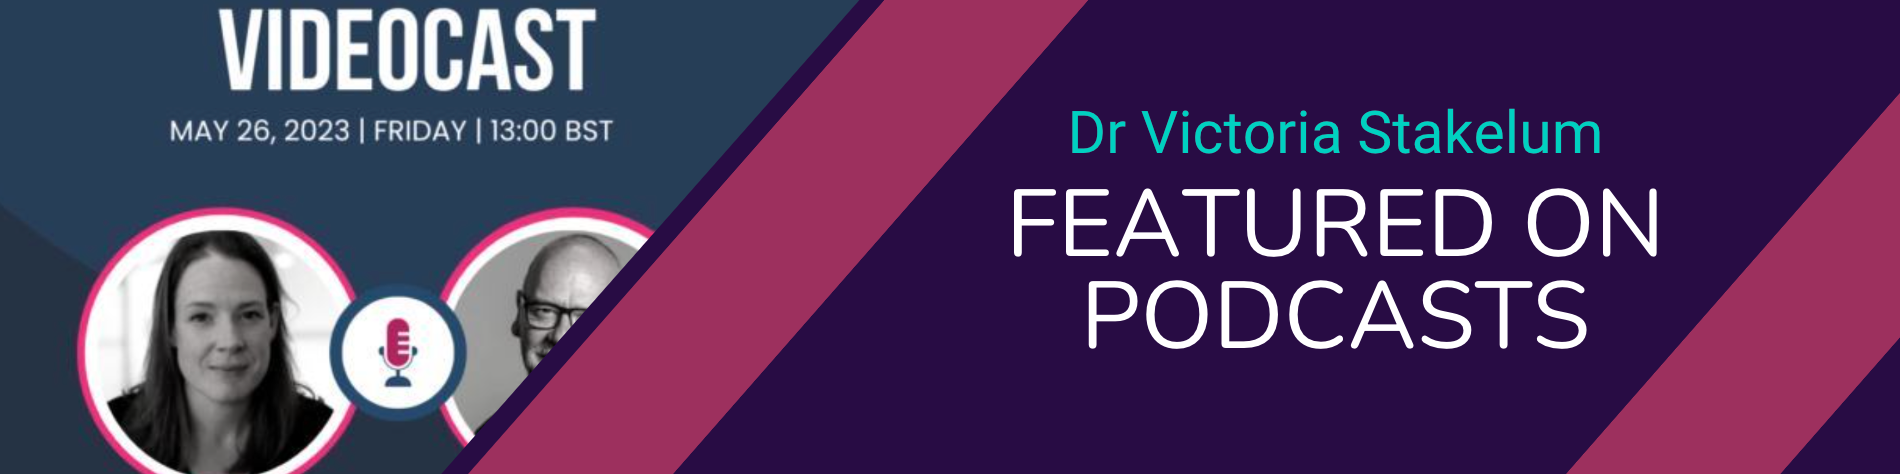 Dr Victoria Stakelum featured on podcasts